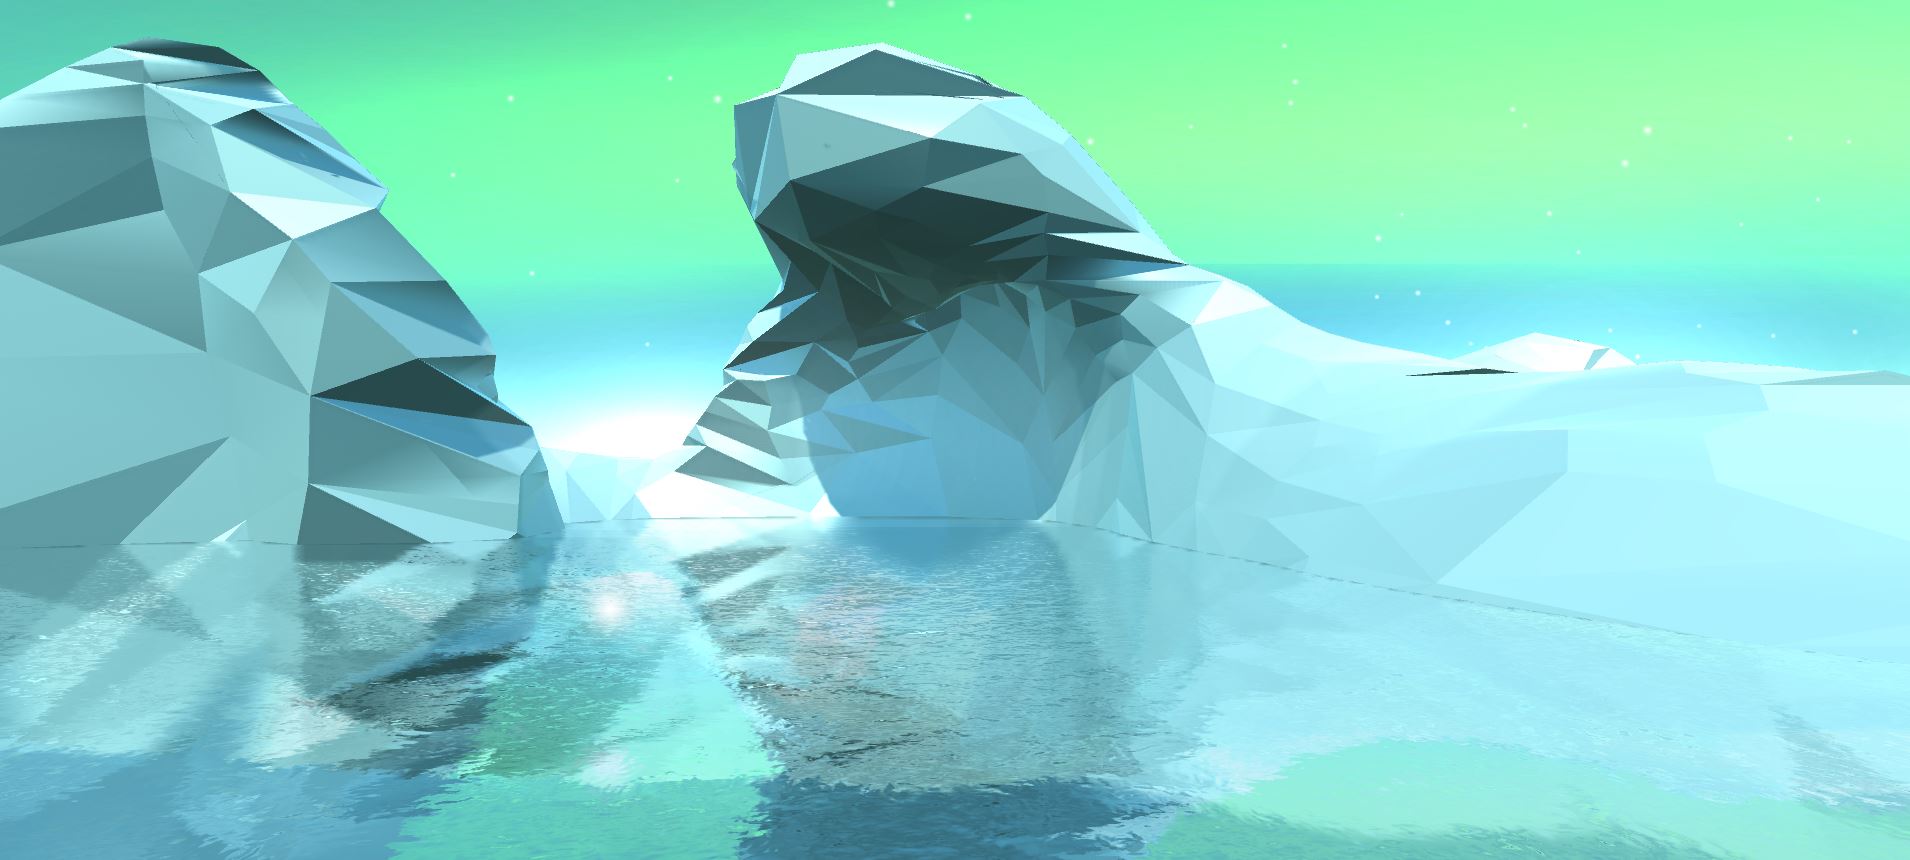 a simulated 3D low-poly scenery of an iceberg in water